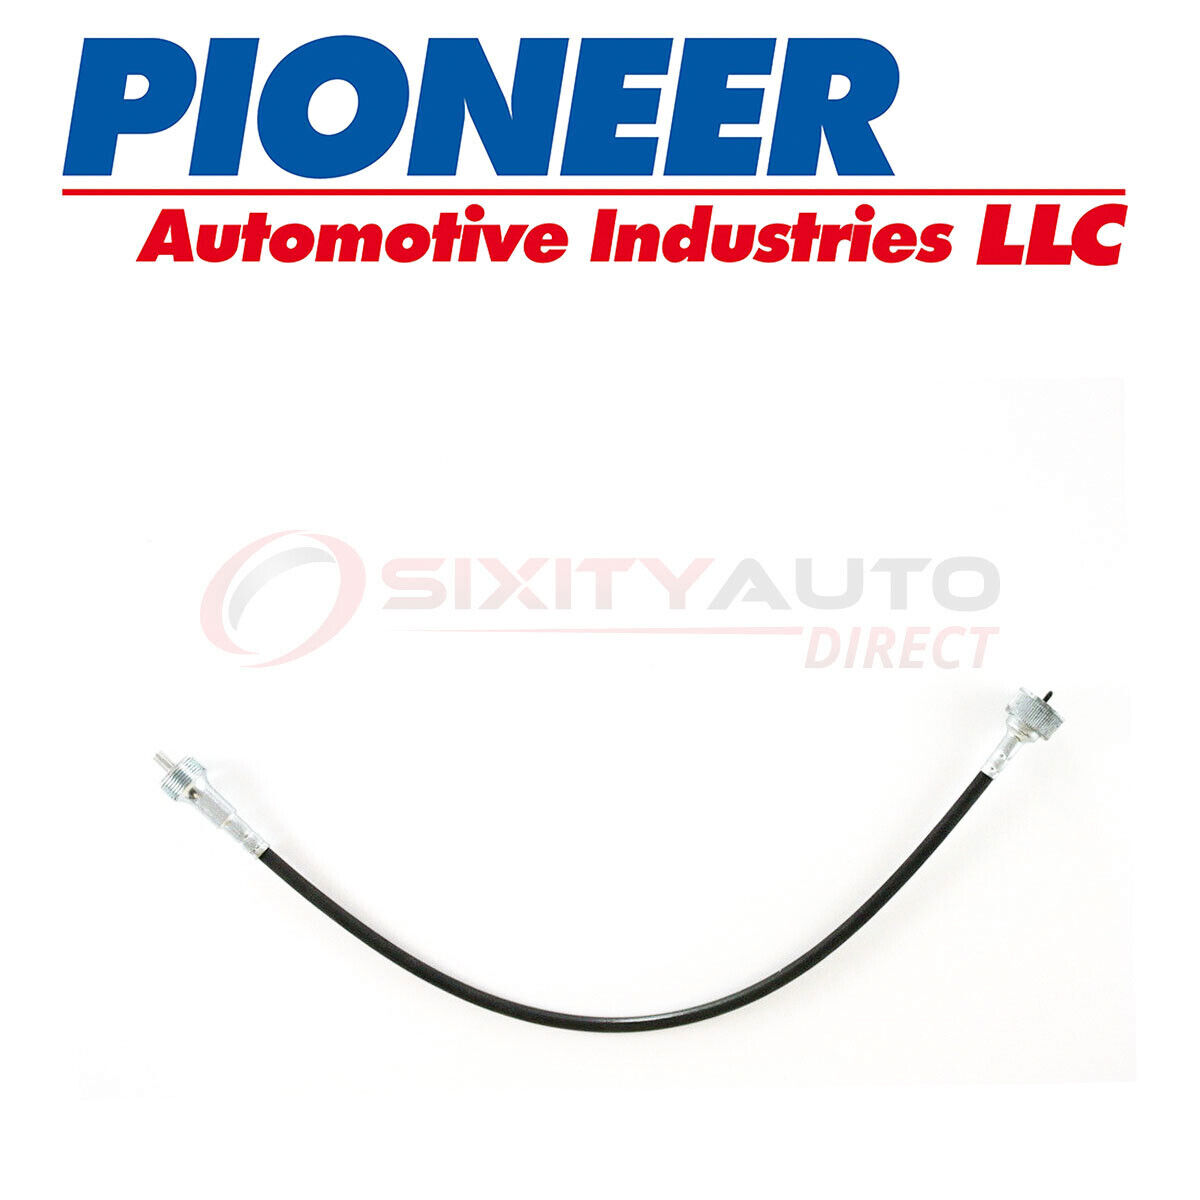 Pioneer Speedometer Cable for 1978-1987 Oldsmobile Cutlass Salon 3.8L 4.3L ep